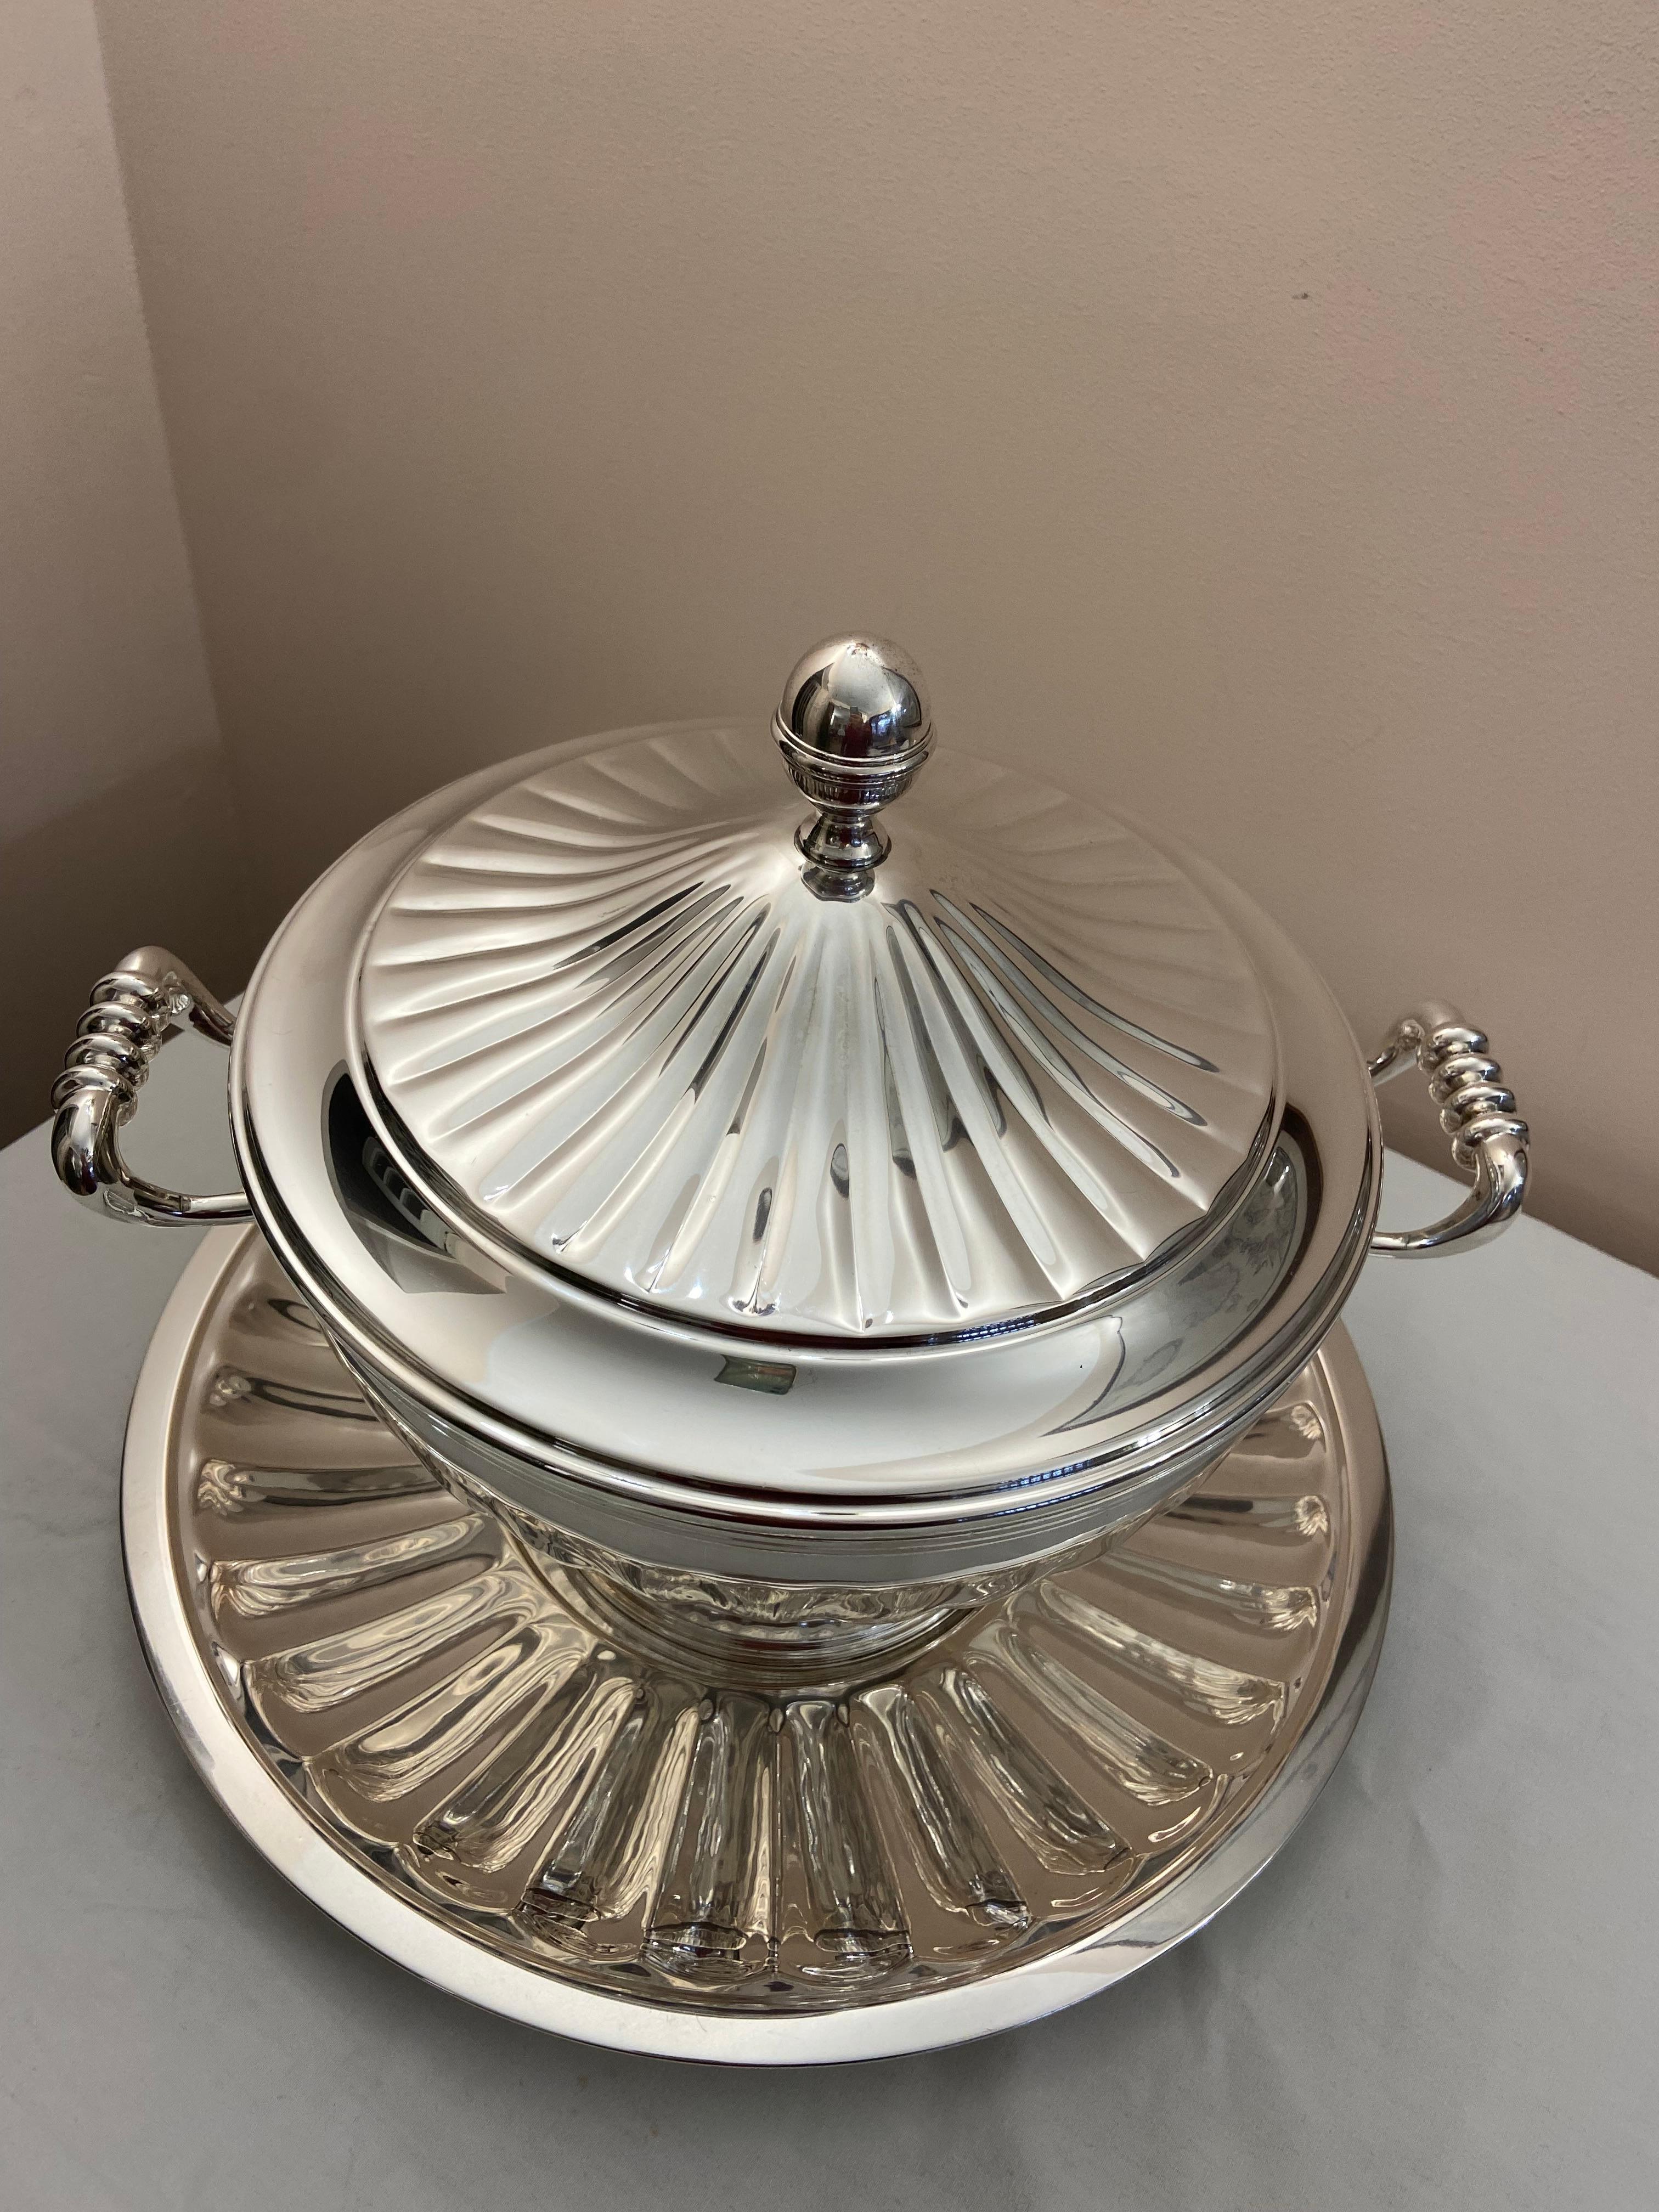 800 silver tureen and plate set, Italian manufacturing. The complete set weighs 3015 grams (the tureen weighs 1345 grams and has a diameter, including the handles of 35 cm; The lid weighs 775 grams and has a diameter of 27 cm; The plate weighs 895